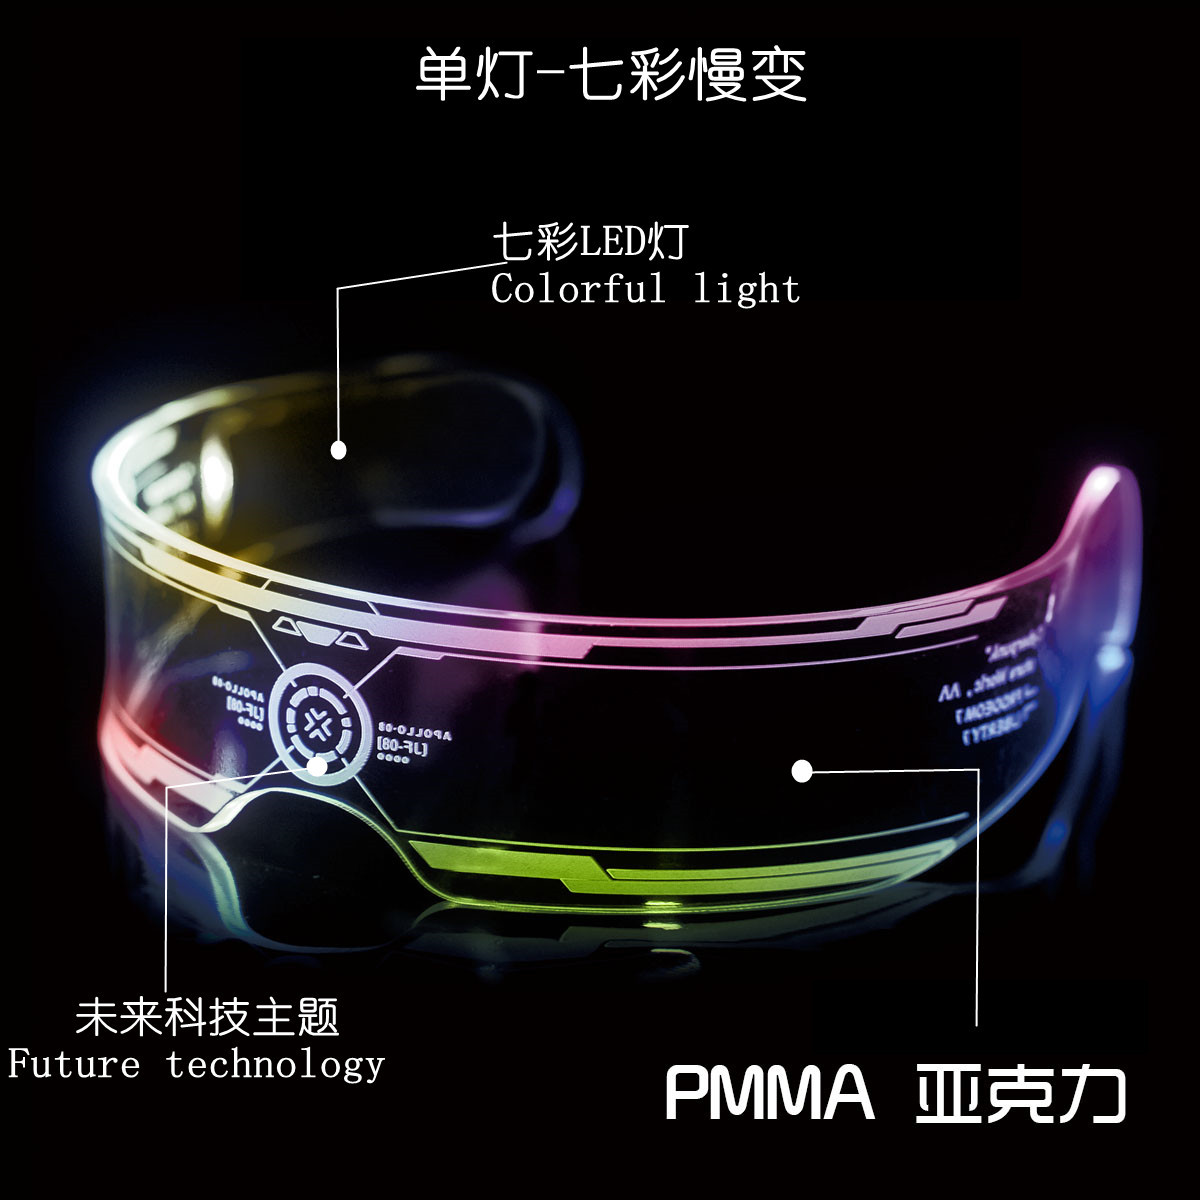 Led Goggles Live Broadcast Similar Glasses Square Hot Sale Flash Toys Disco Dancing Atmosphere Glowing